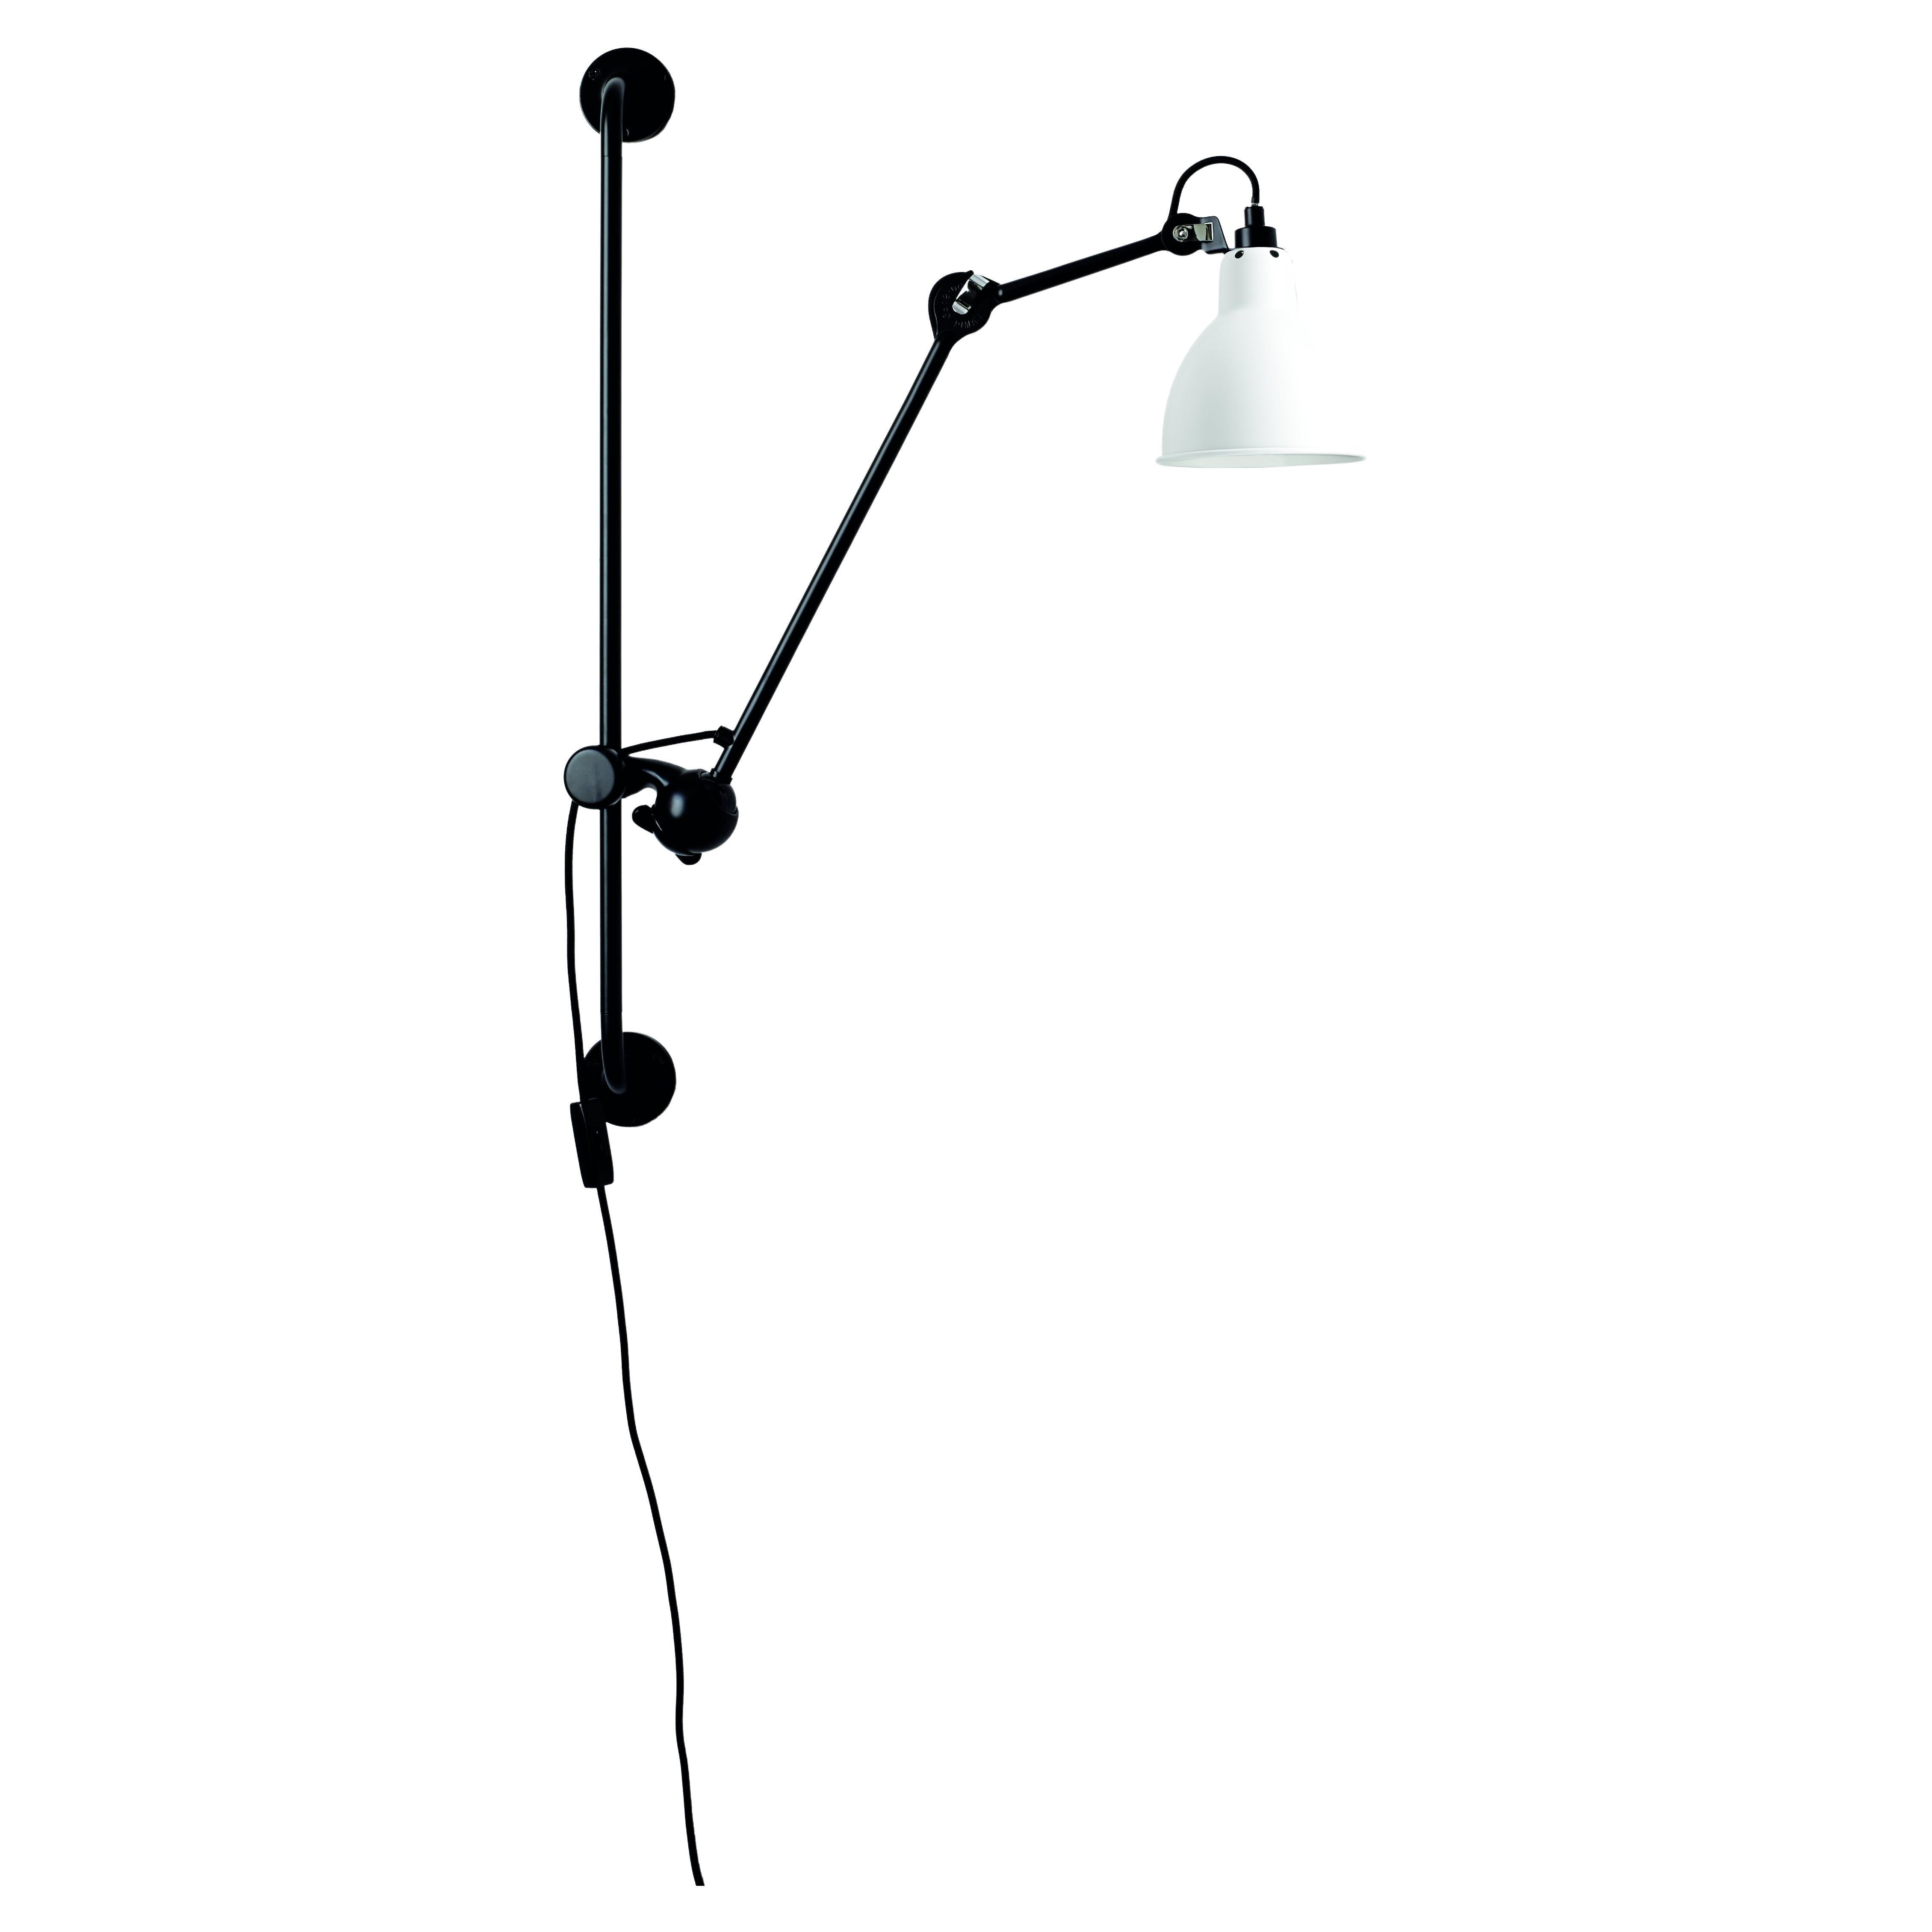 DCW Editions La Lampe Gras N°210 Wall Lamp in Black Arm and White Shade For Sale